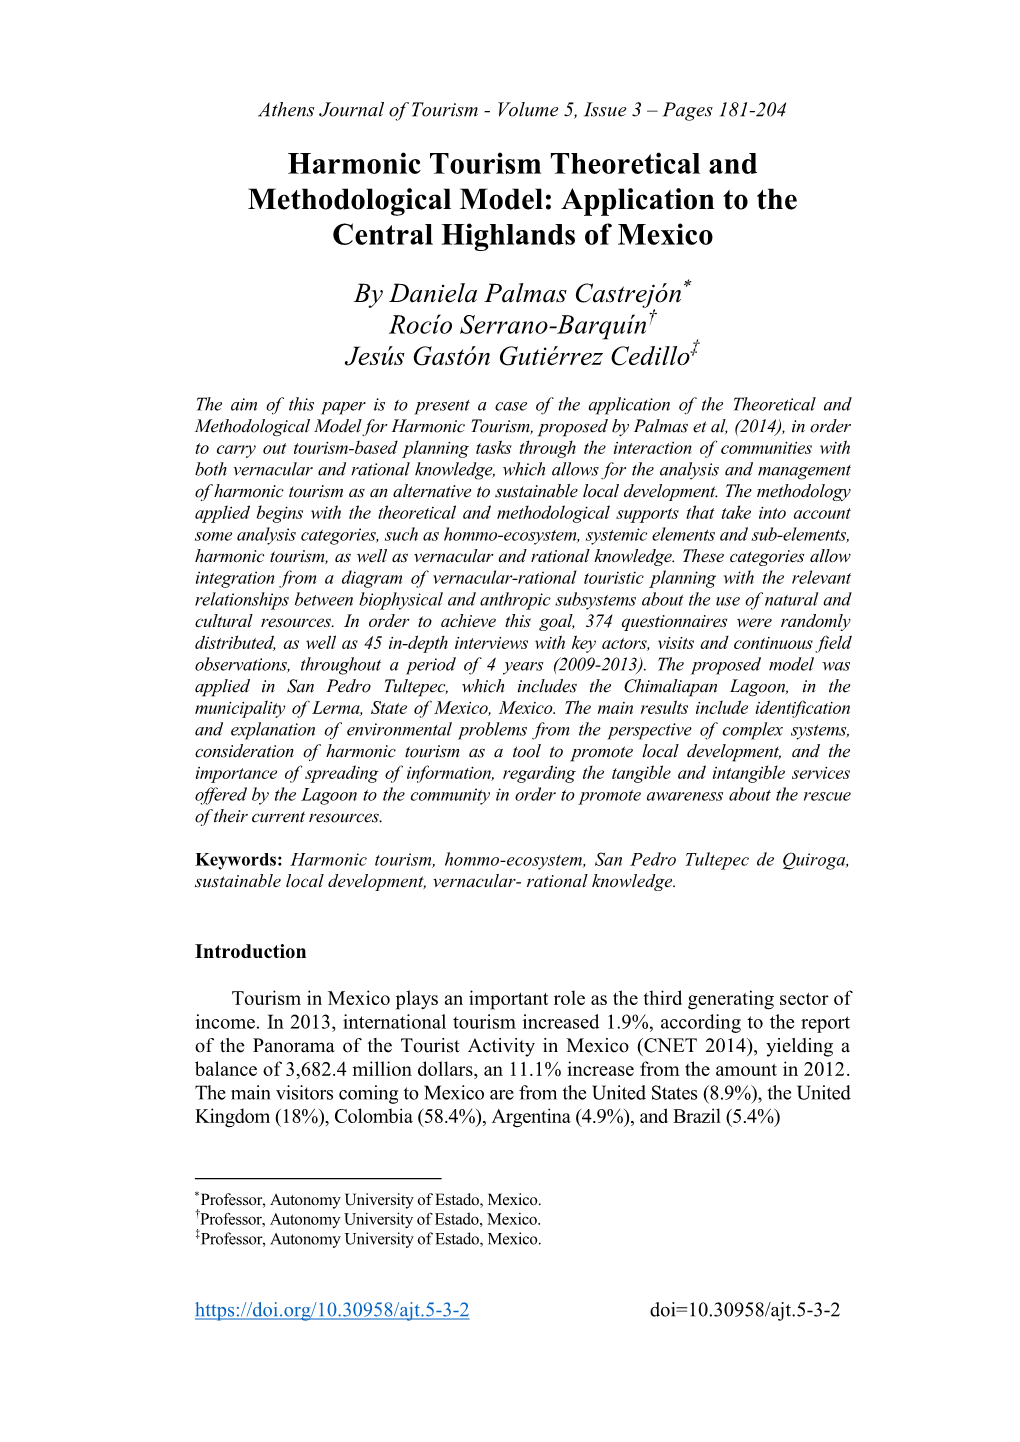 Harmonic Tourism Theoretical and Methodological Model: Application to the Central Highlands of Mexico